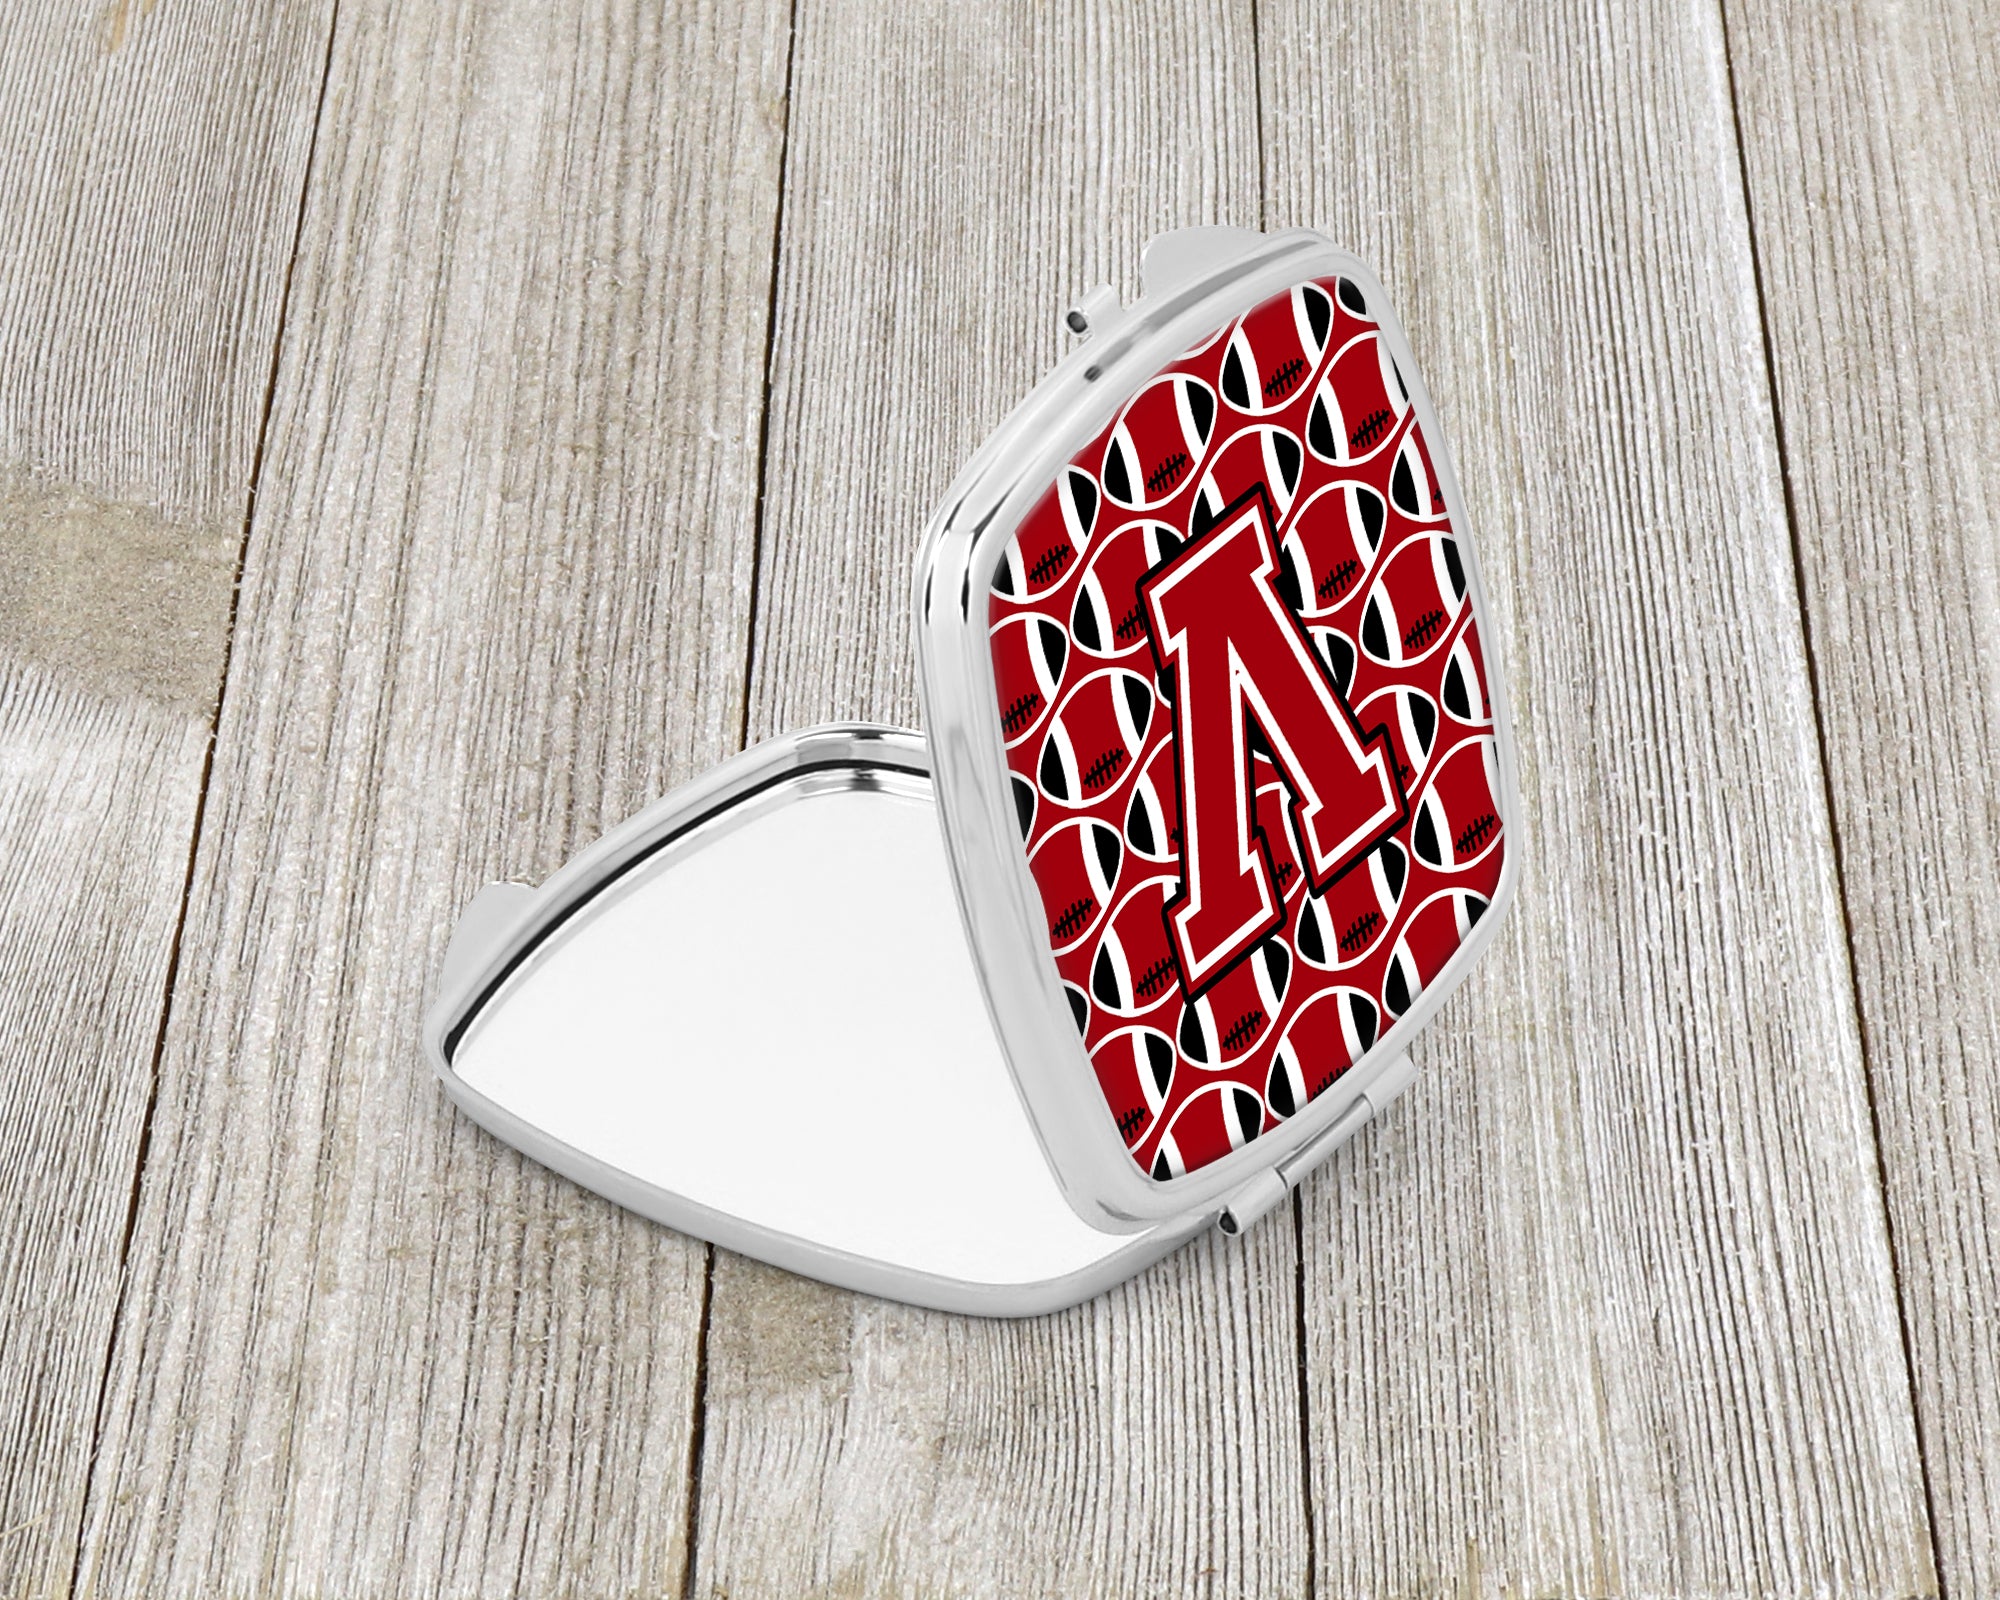 Letter V Football Red, Black and White Compact Mirror CJ1073-VSCM  the-store.com.